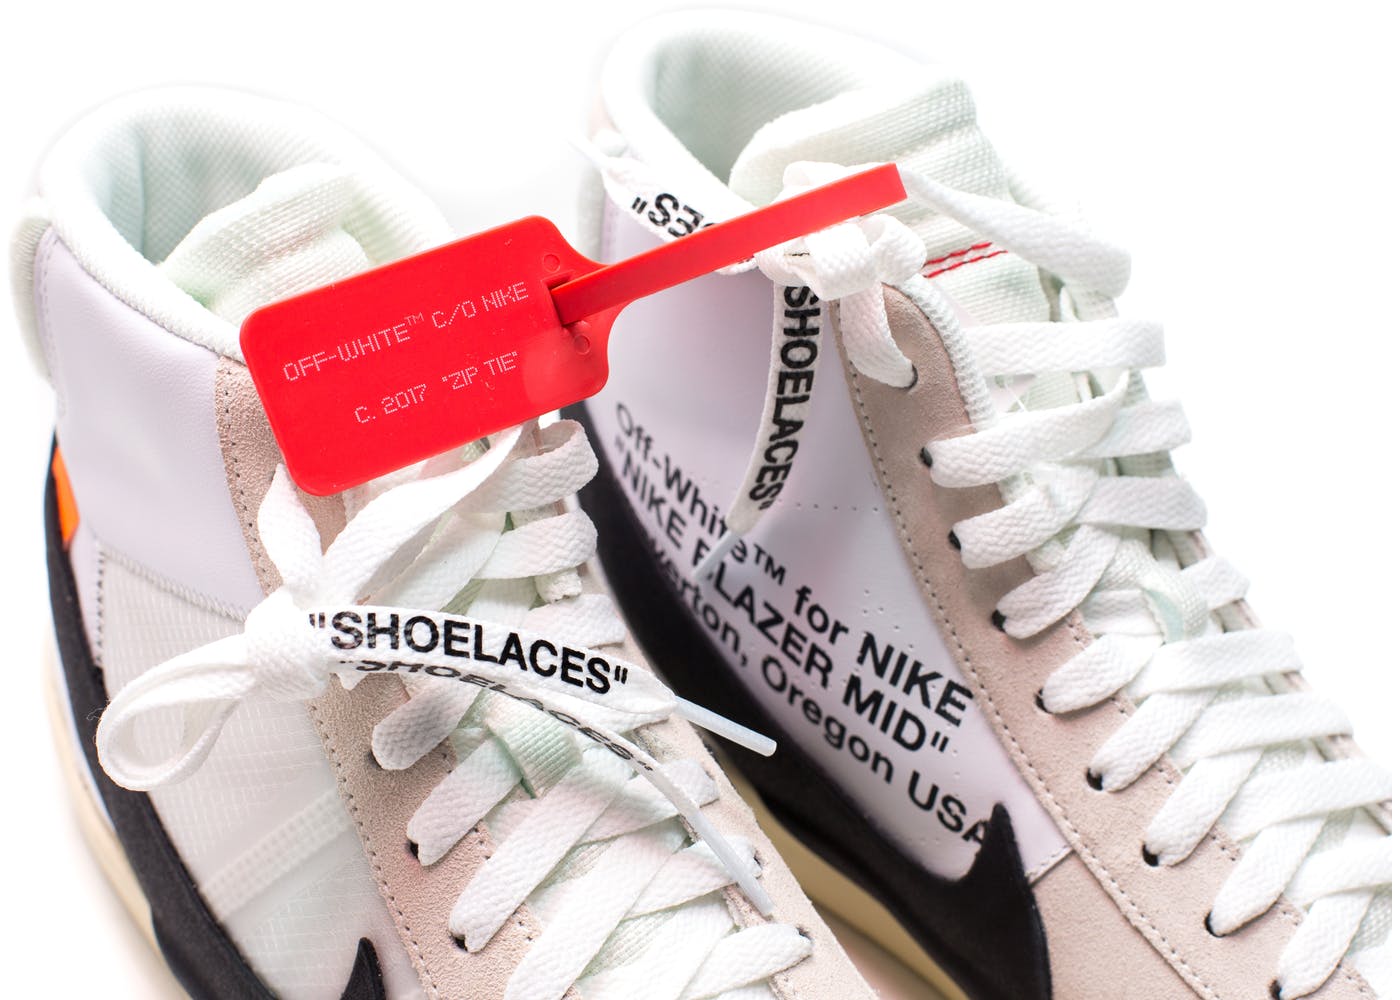 Where to buy the OFF-WHITE "SHOELACES" Laces? Slickies